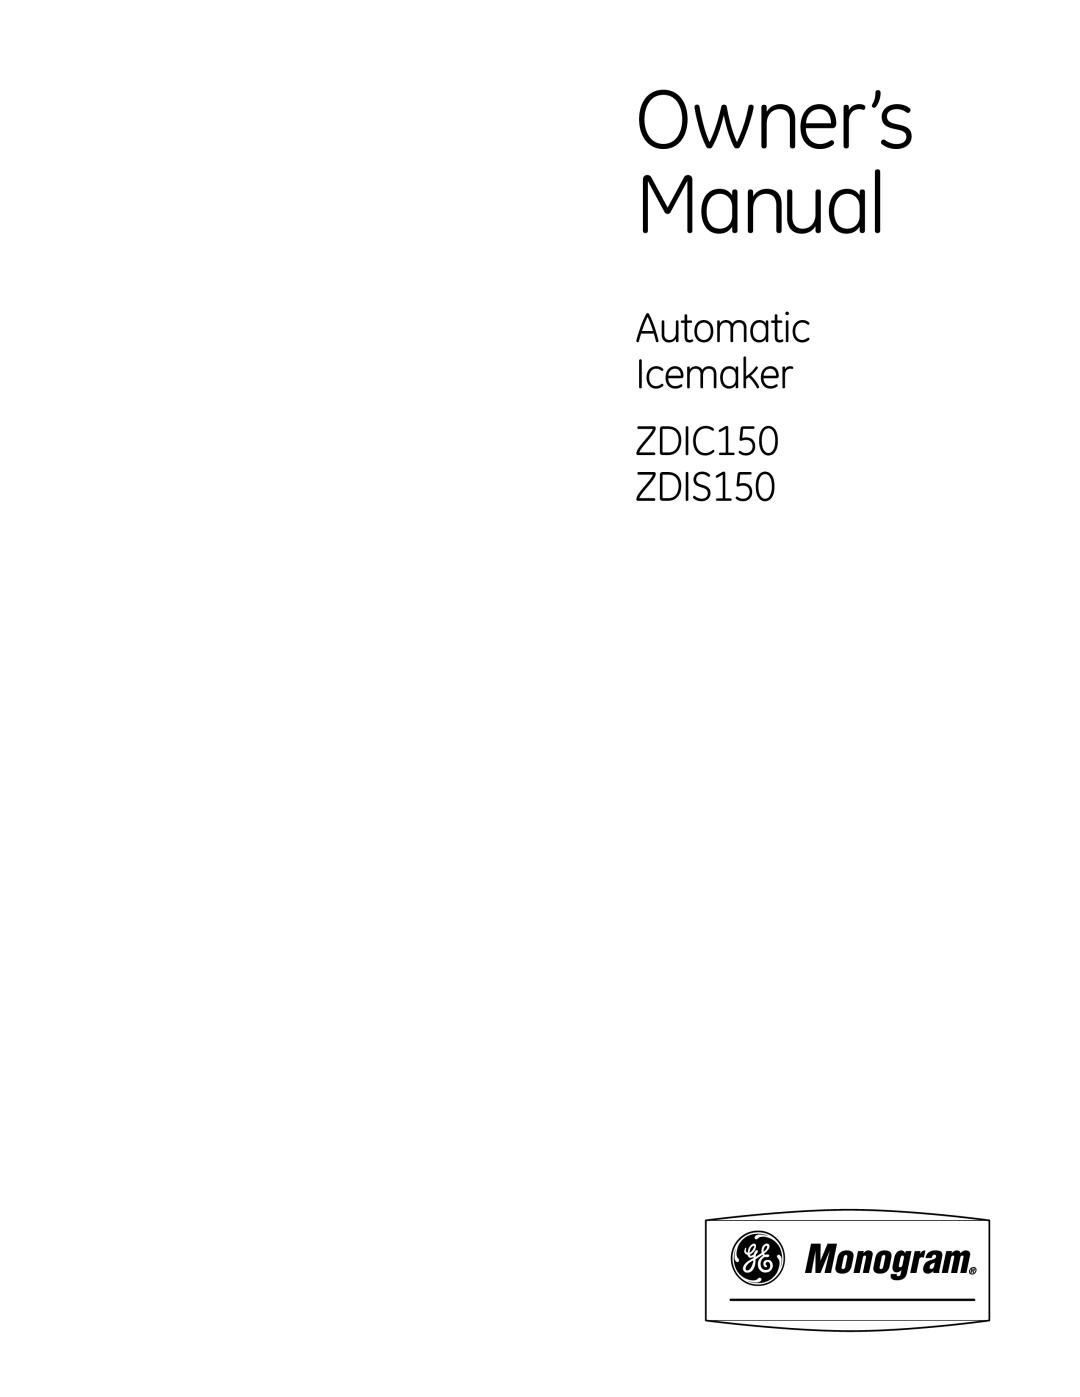 GE owner manual Owner’s Manual, Automatic Icemaker ZDIC150 ZDIS150 